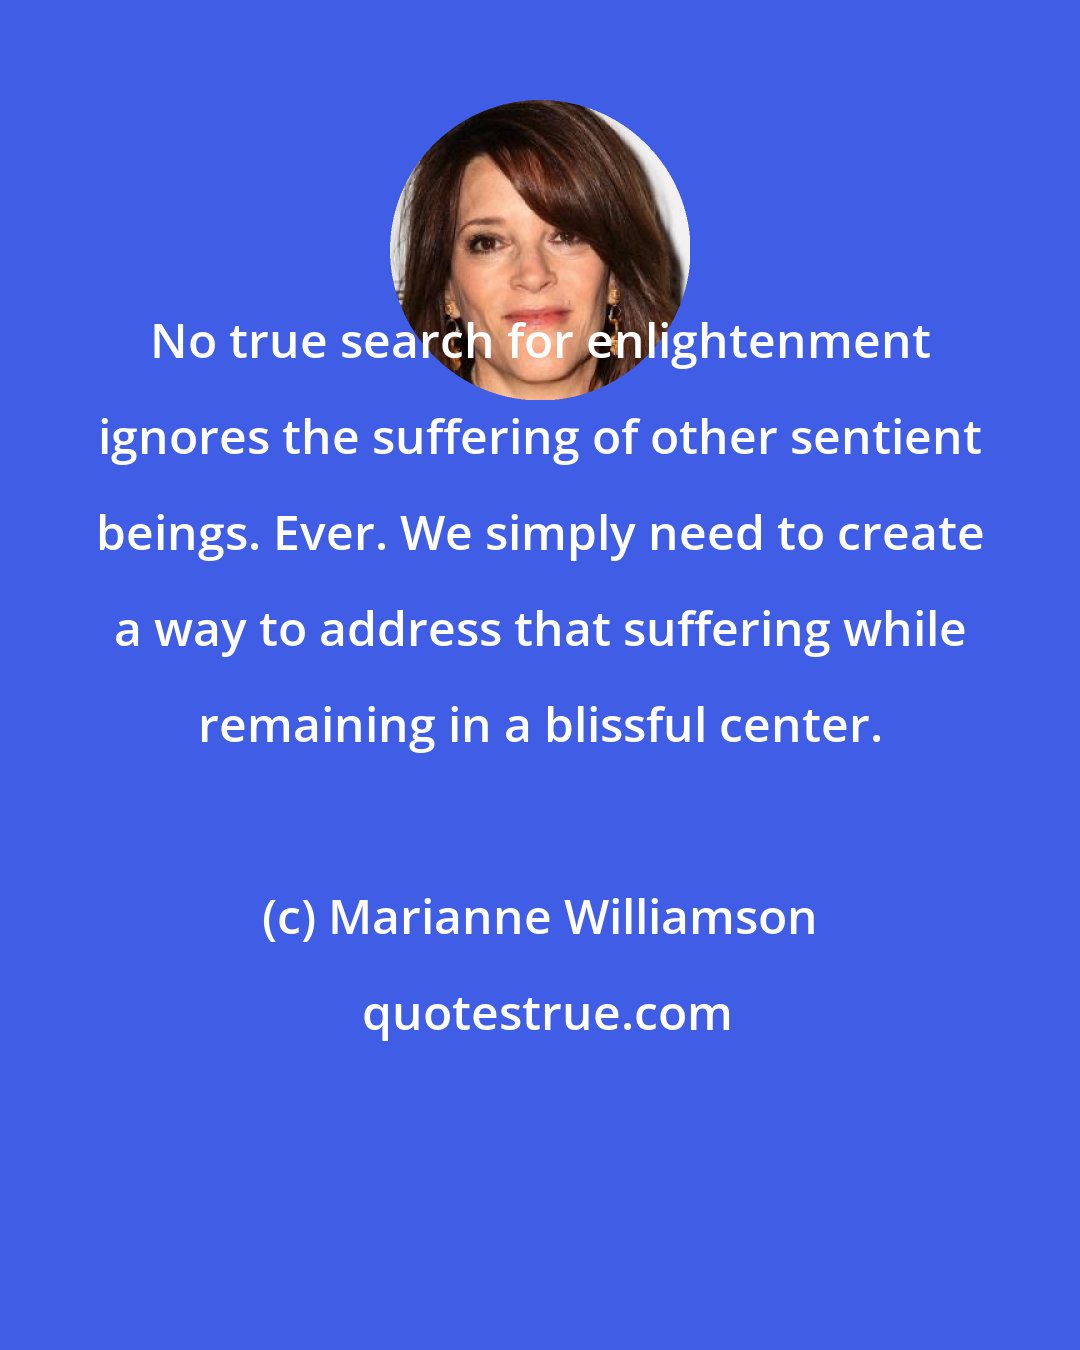 Marianne Williamson: No true search for enlightenment ignores the suffering of other sentient beings. Ever. We simply need to create a way to address that suffering while remaining in a blissful center.